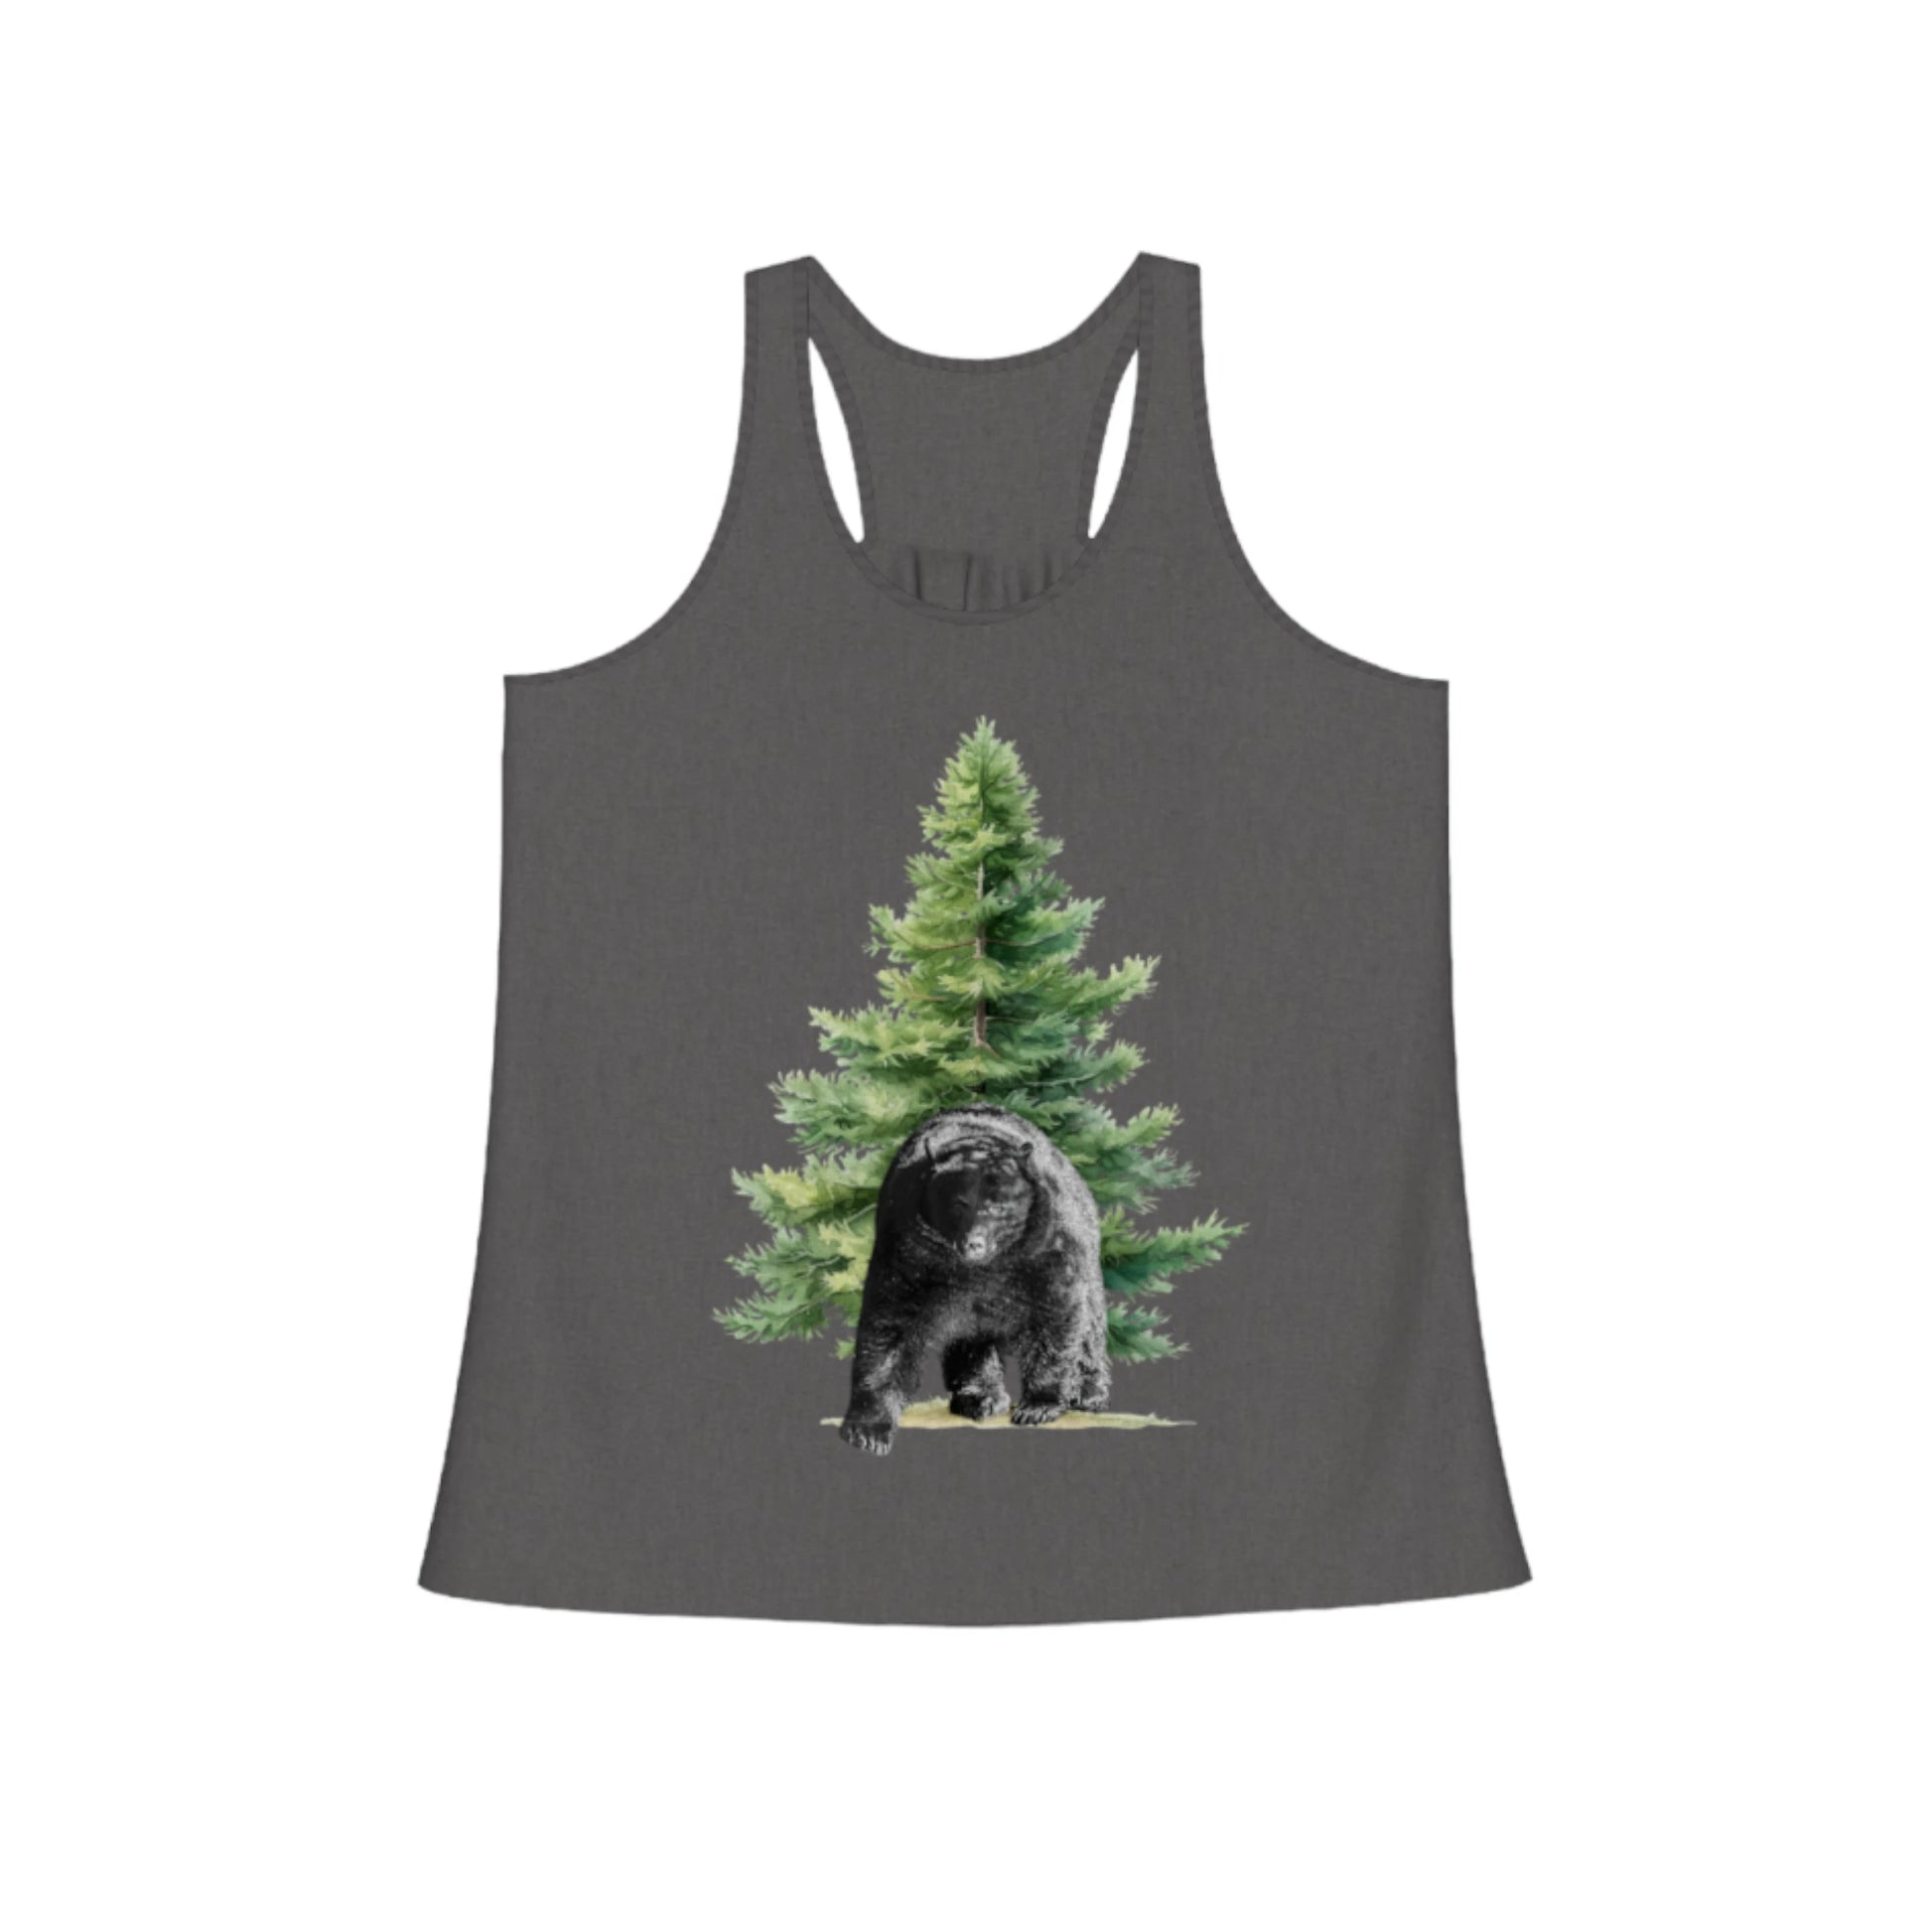 Observant Bear Flow Racerback Tank Top.  The image on the front shows two sea lions on a abstract ocean blue background. By van isle goddess dot com